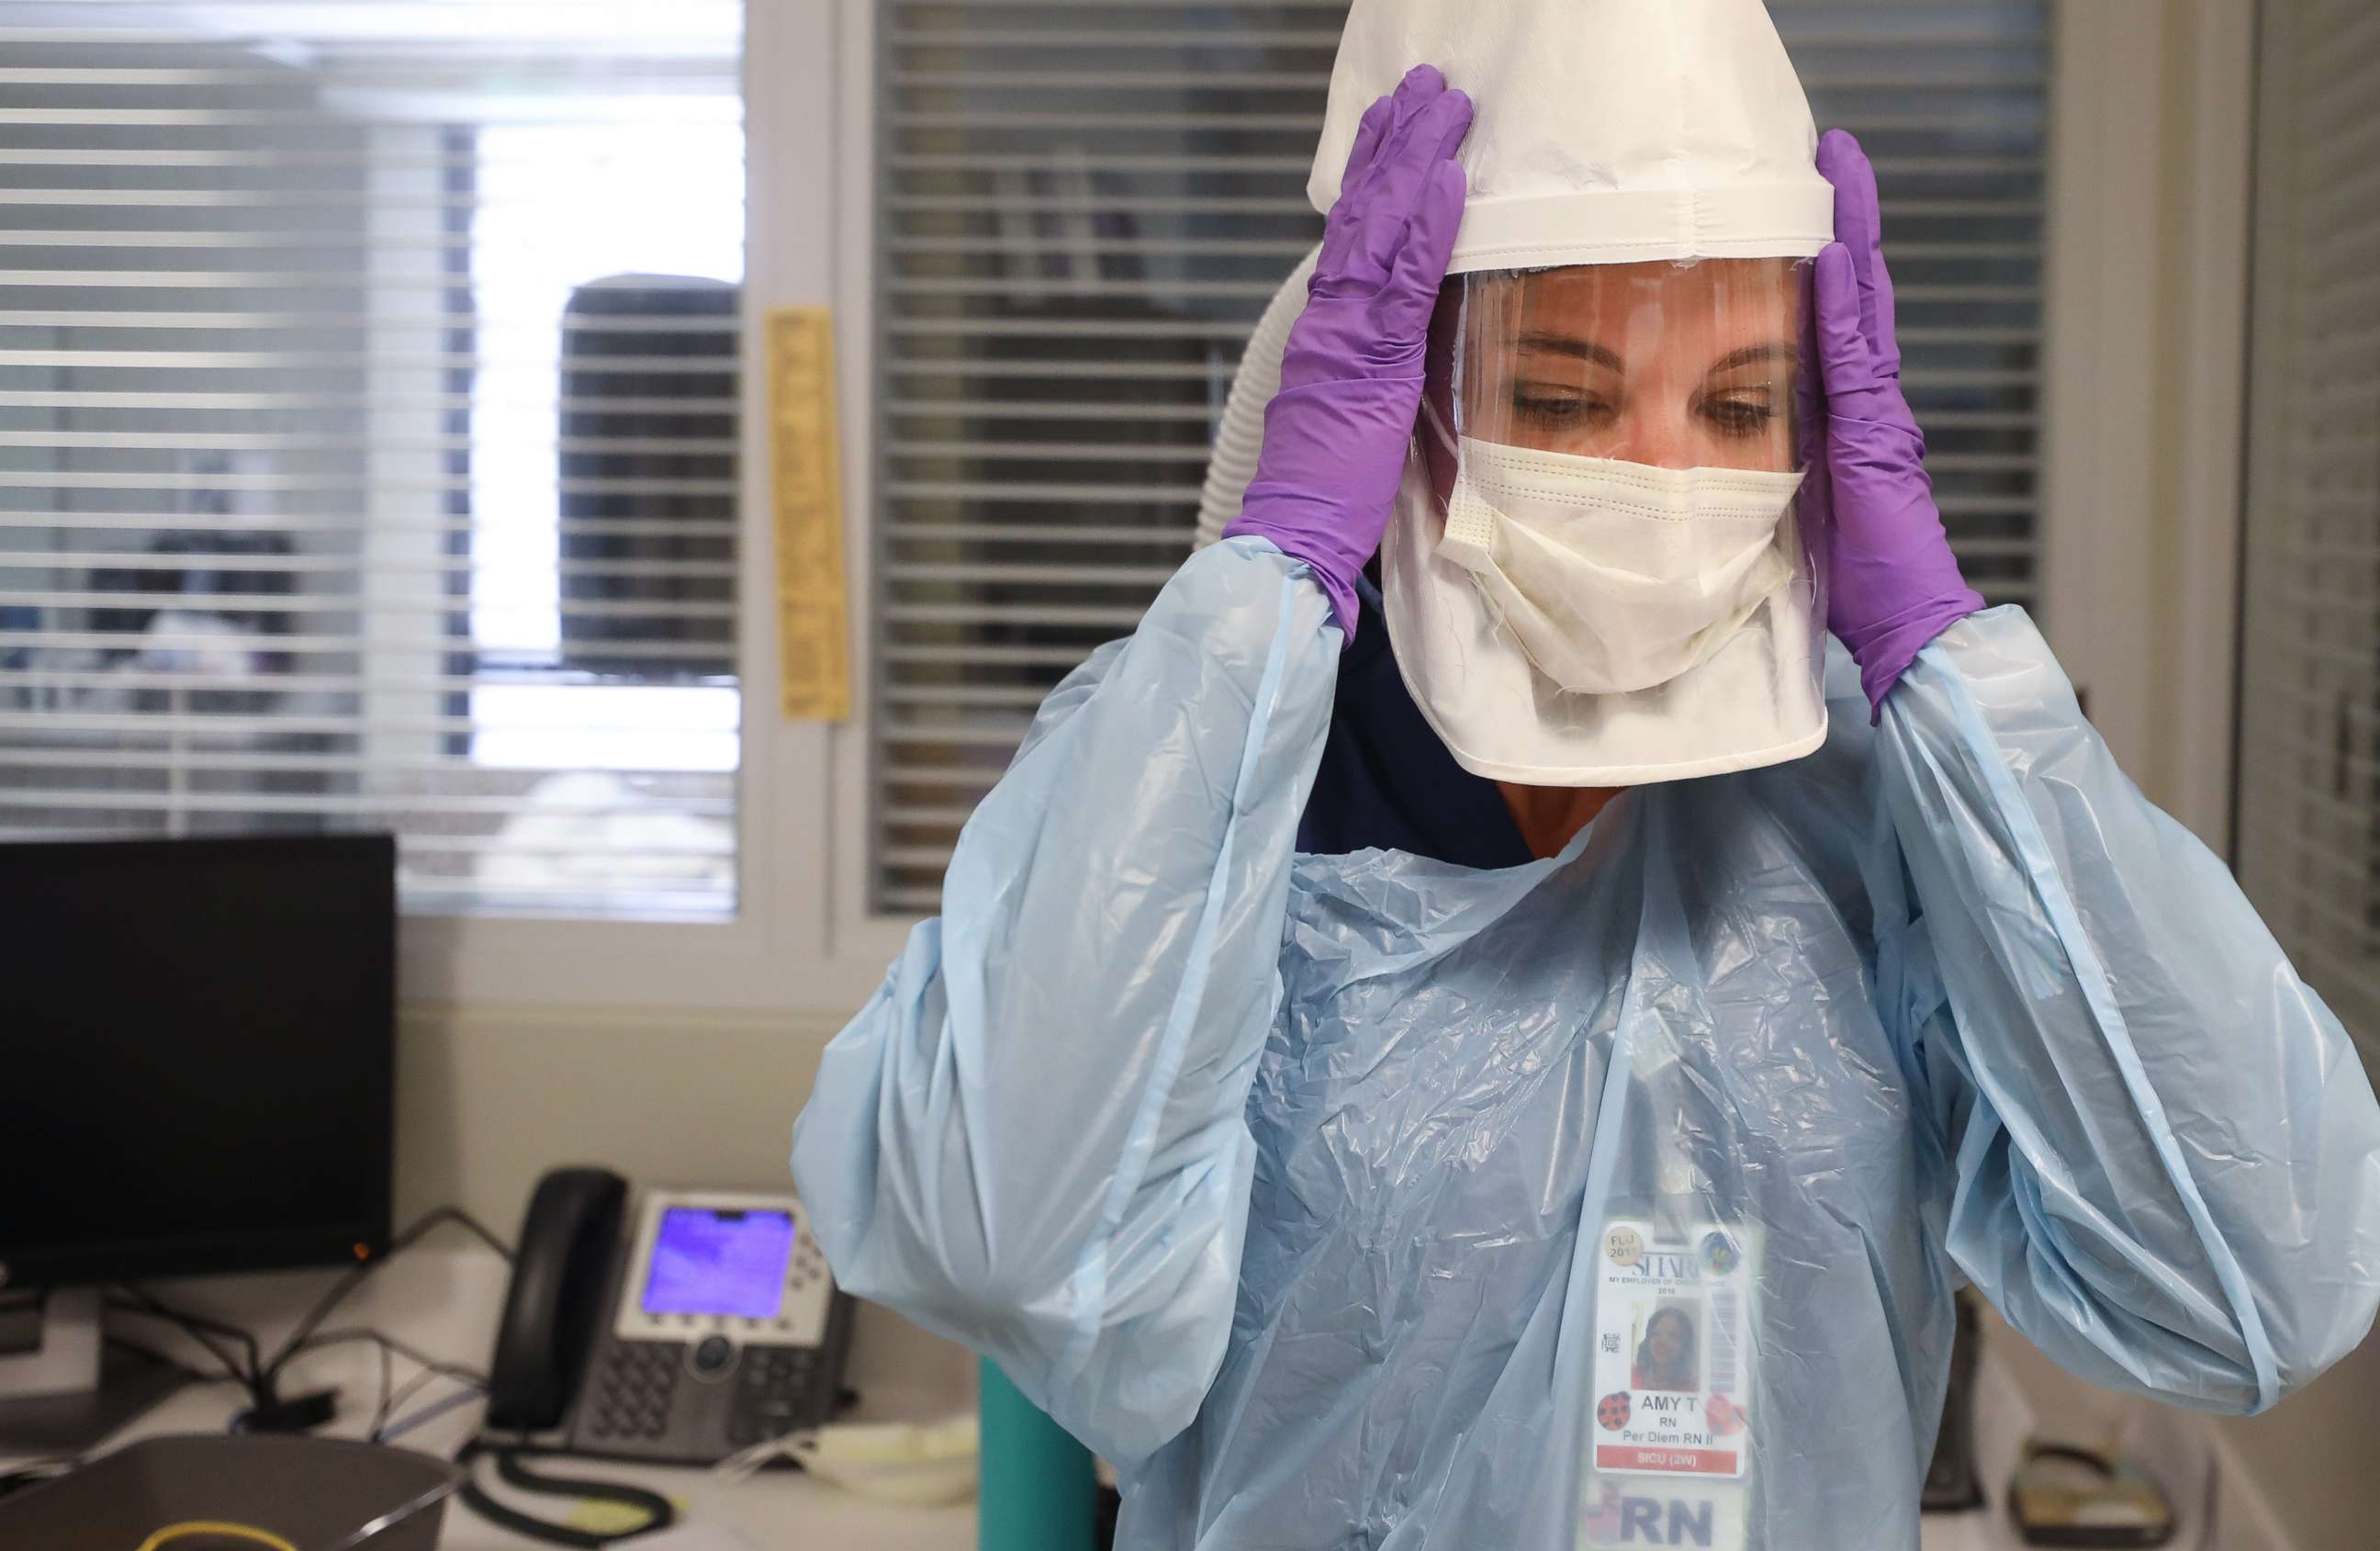 PHOTO: Nurse Amy Tyson adjusts her personal protective equipment before caring for a COVID-19 patient in the Intensive Care Unit at Sharp Memorial Hospital amidst the coronavirus pandemic on May 6, 2020, in San Diego.